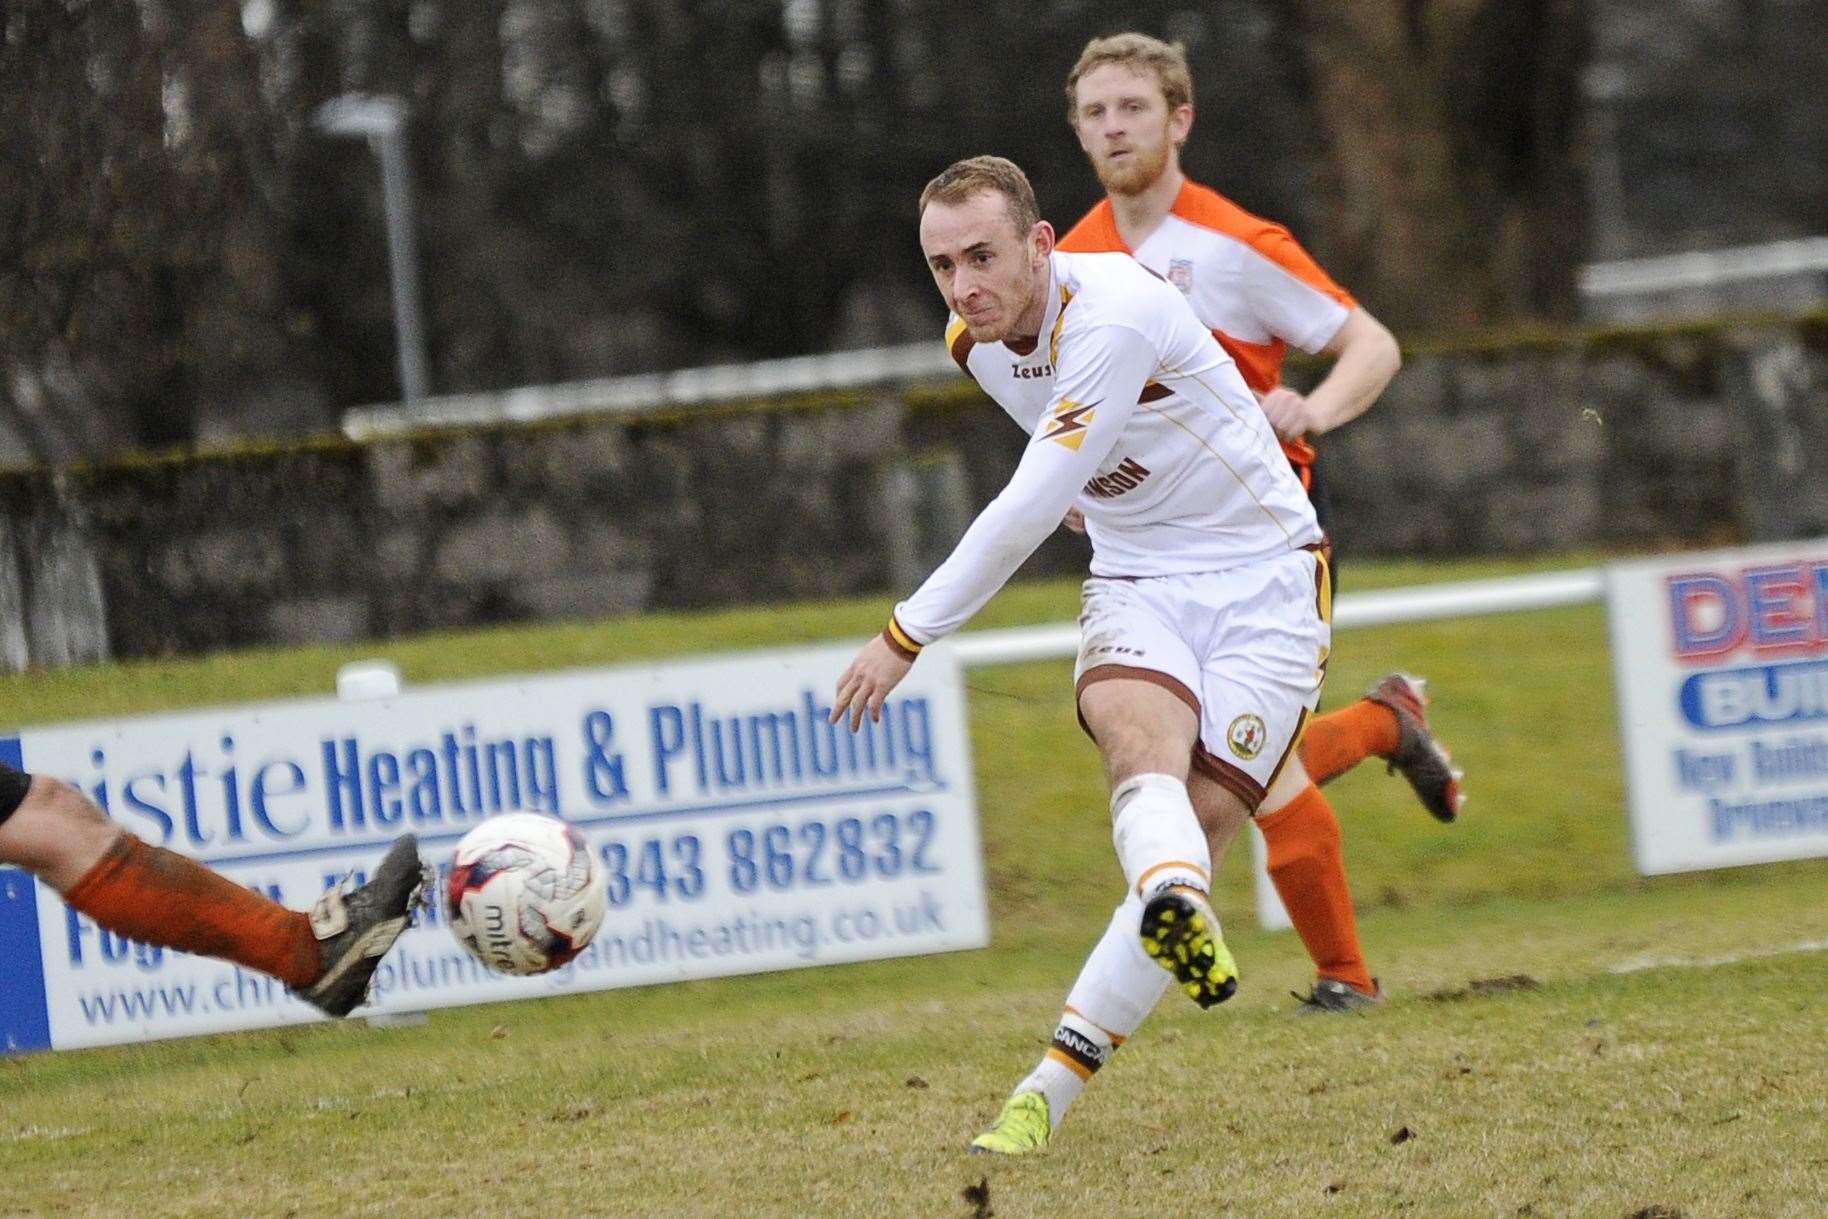 Finlayson playing for Forres Mechanics.